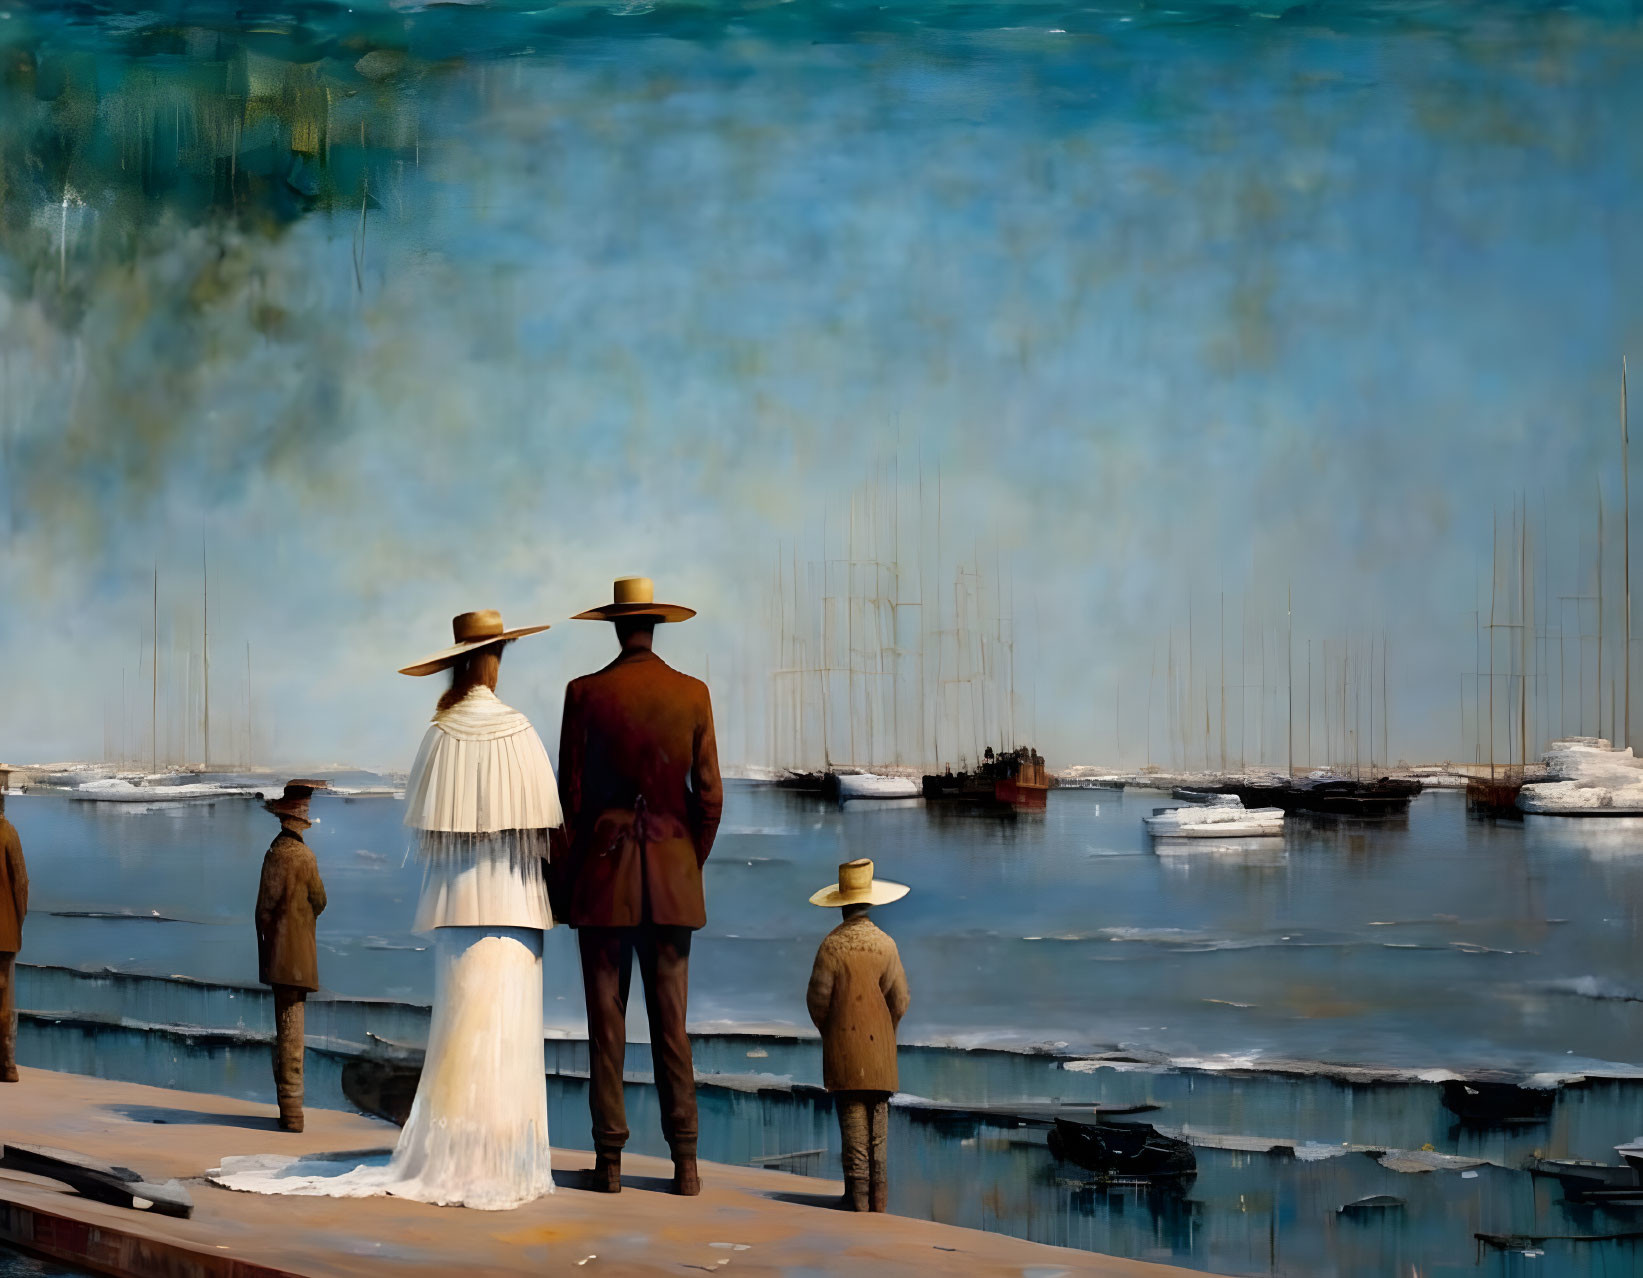 Vintage Attired Family Observing Harbor with Sailboats